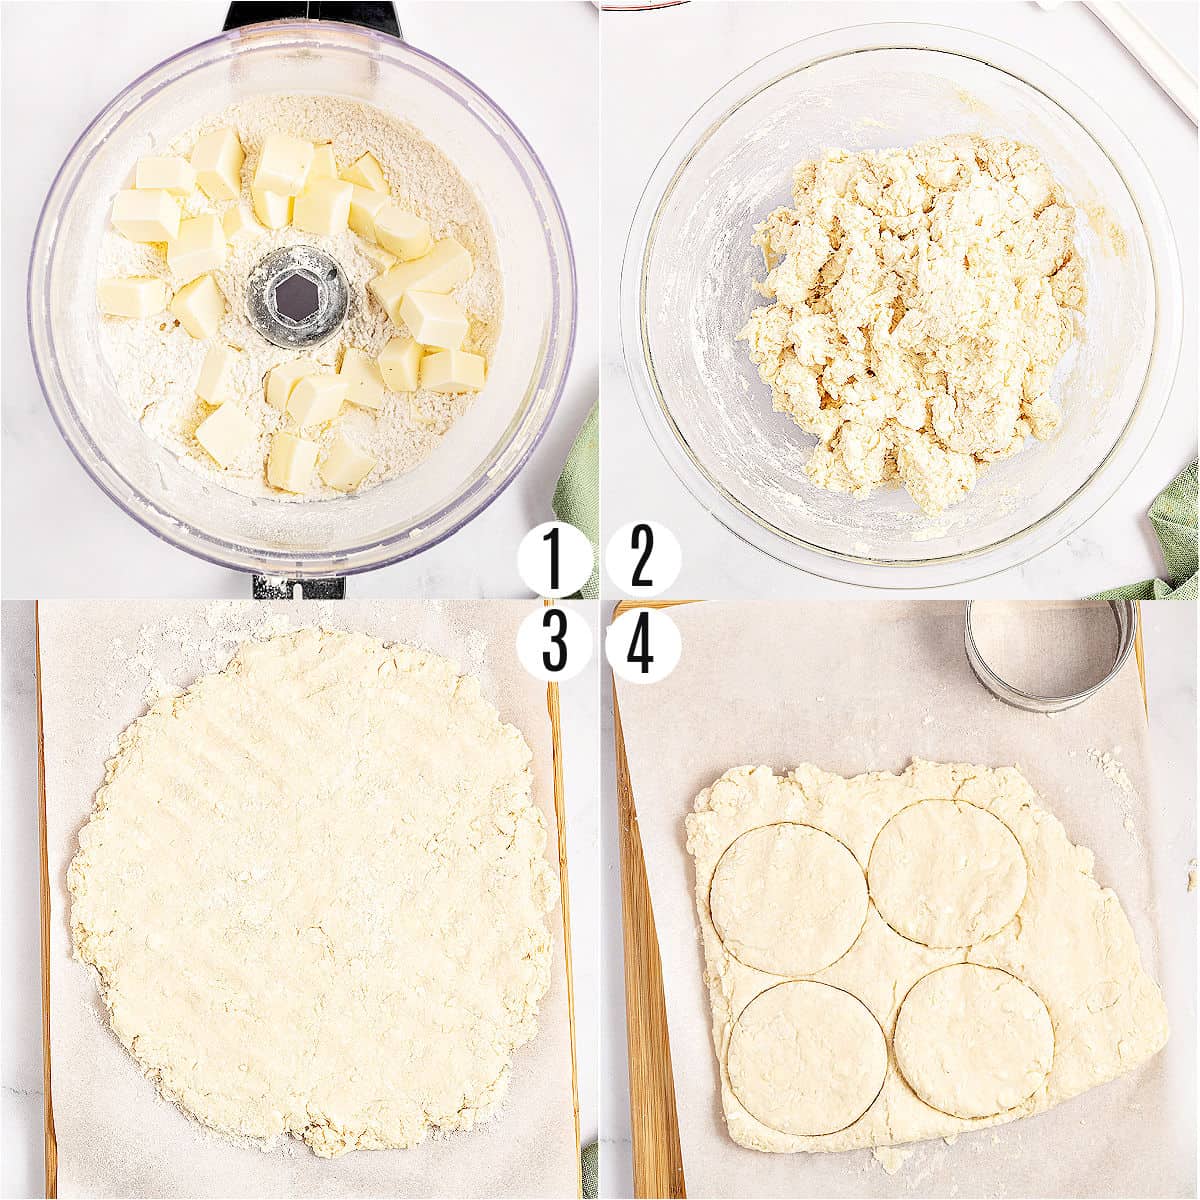 Step by step photos showing how to make homemade biscuits.